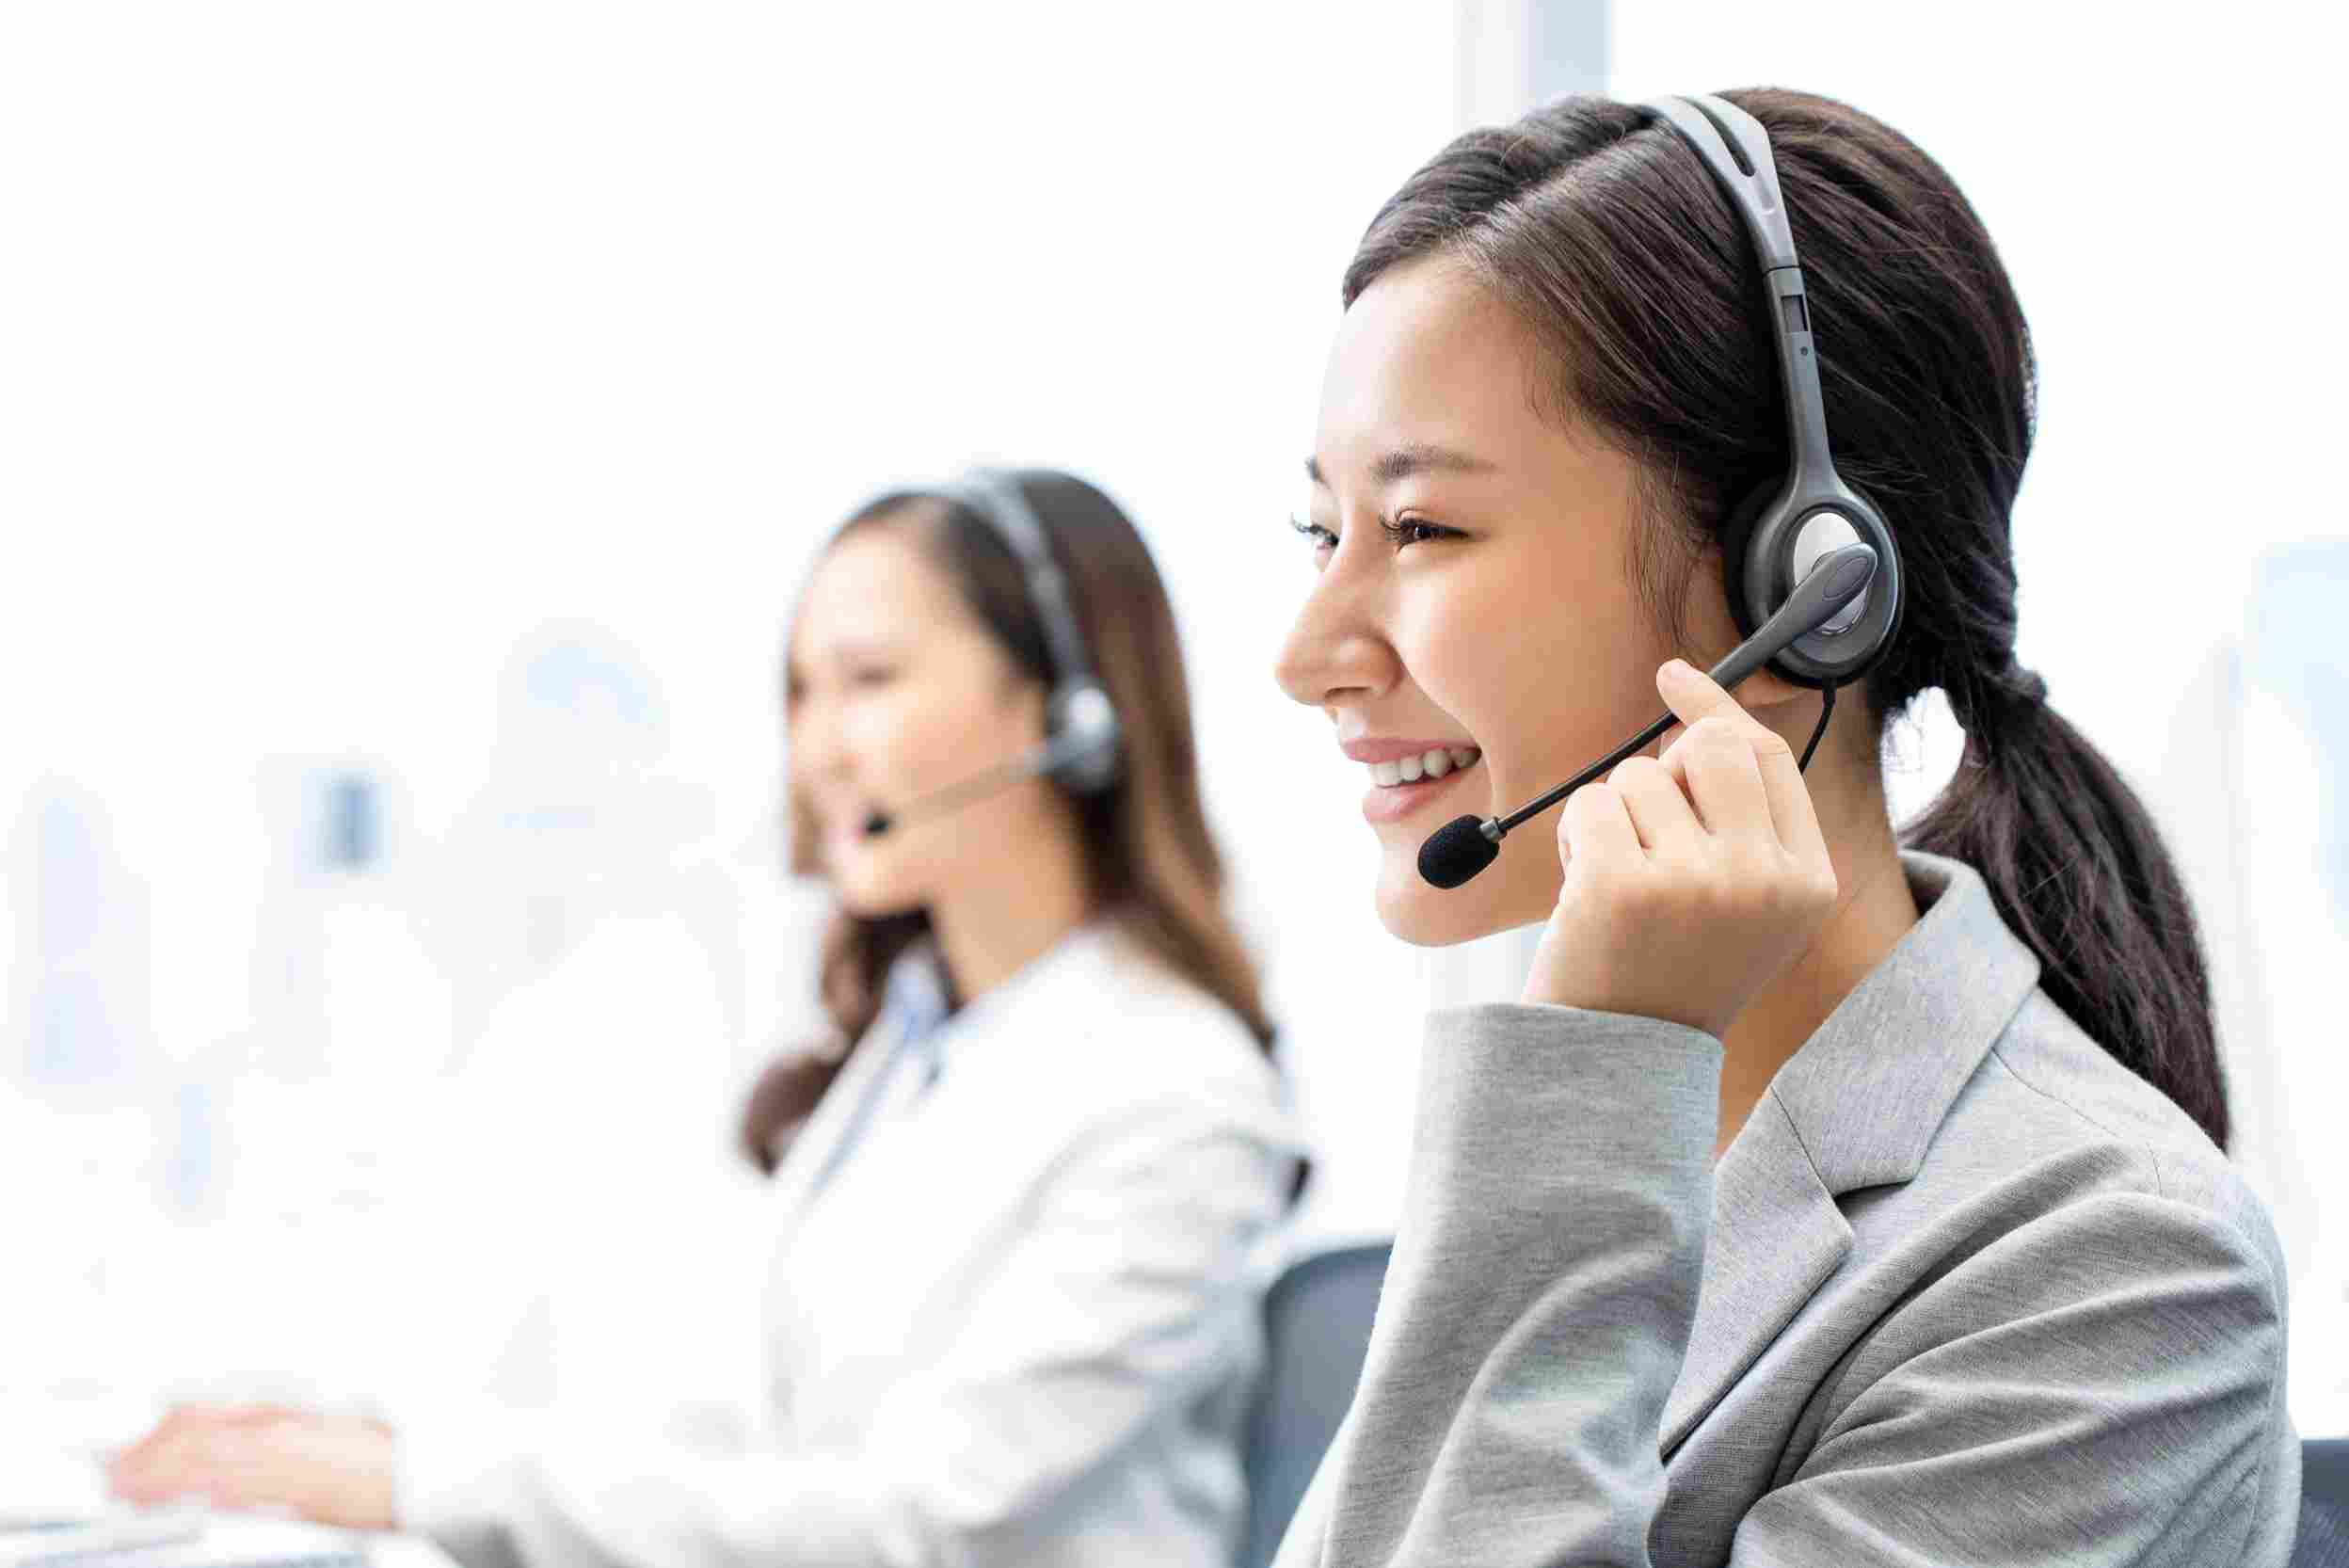 Business Intelligence To Increase Customer Service Satisfaction